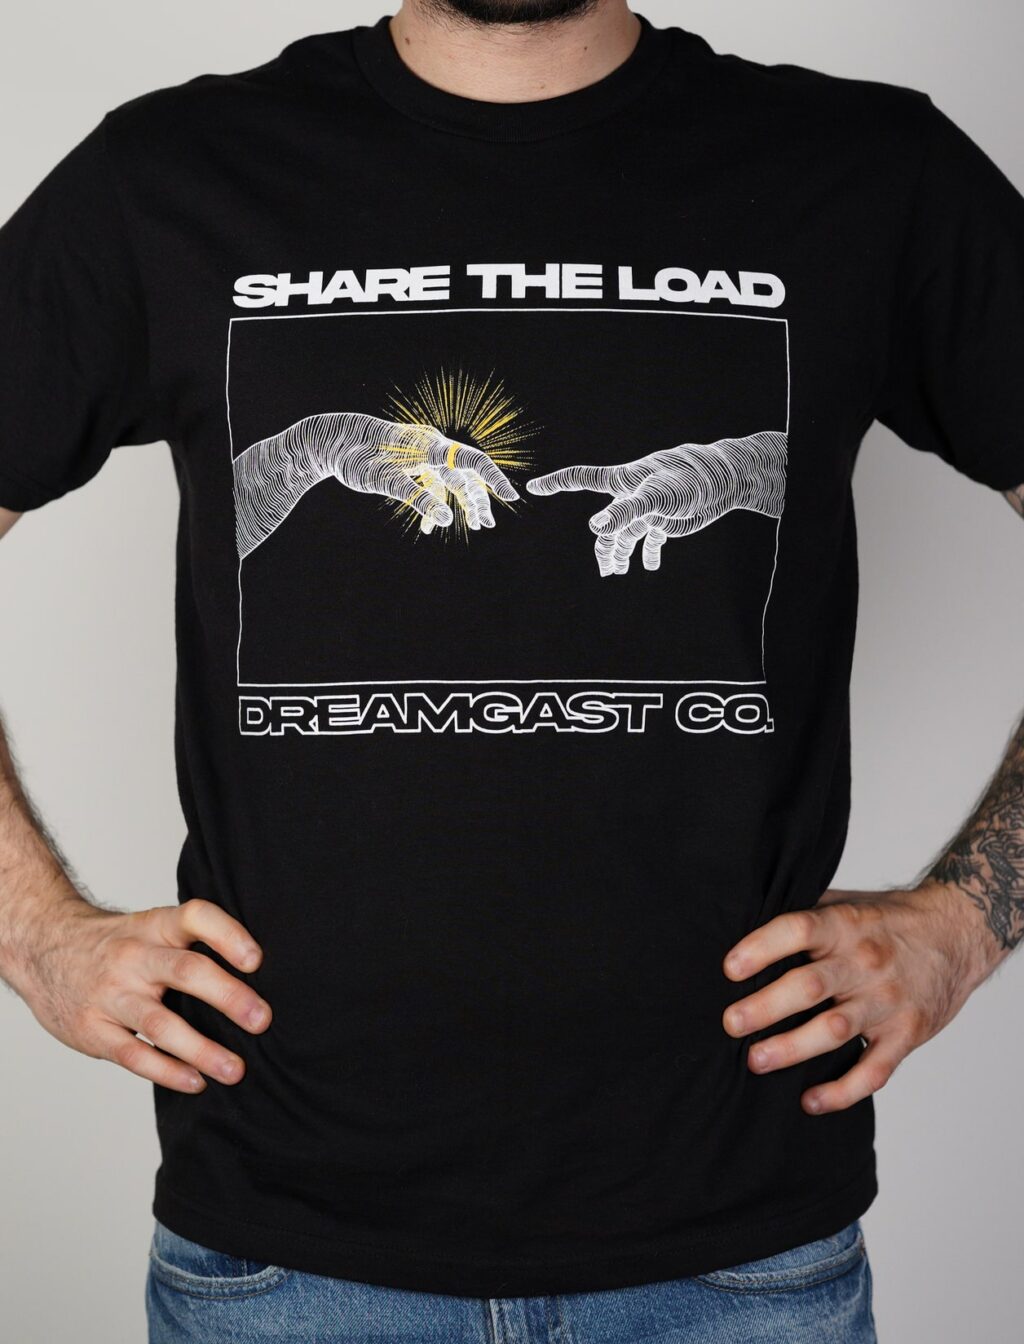 share the load shirt